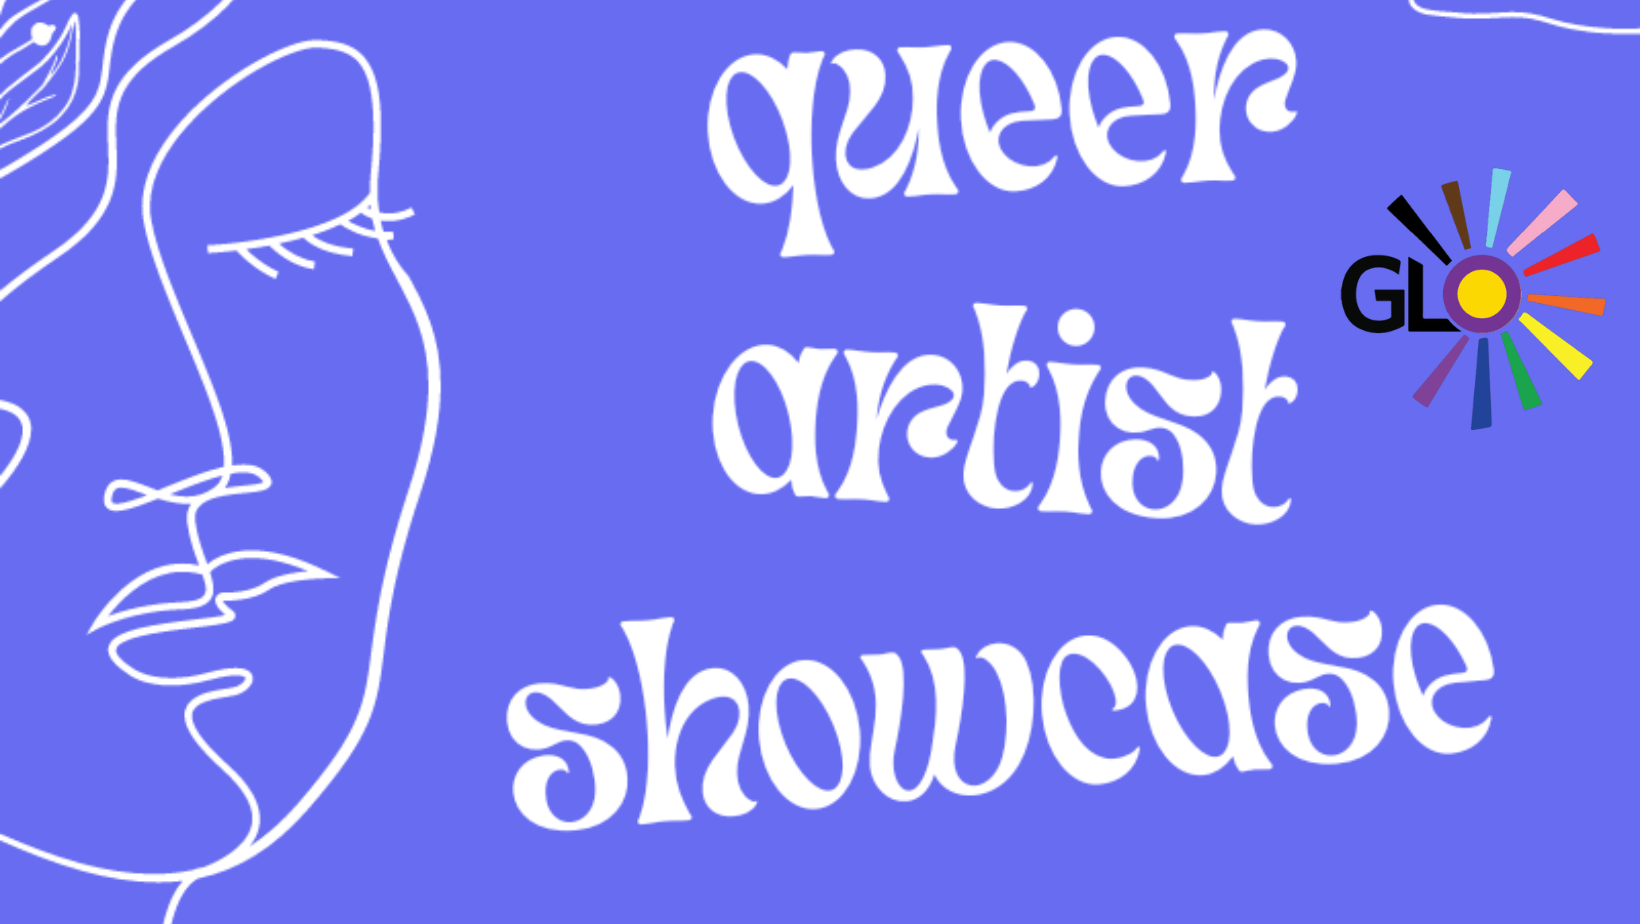 Queer artist showcase image flyer. Purple background with white text and the GLO center logo